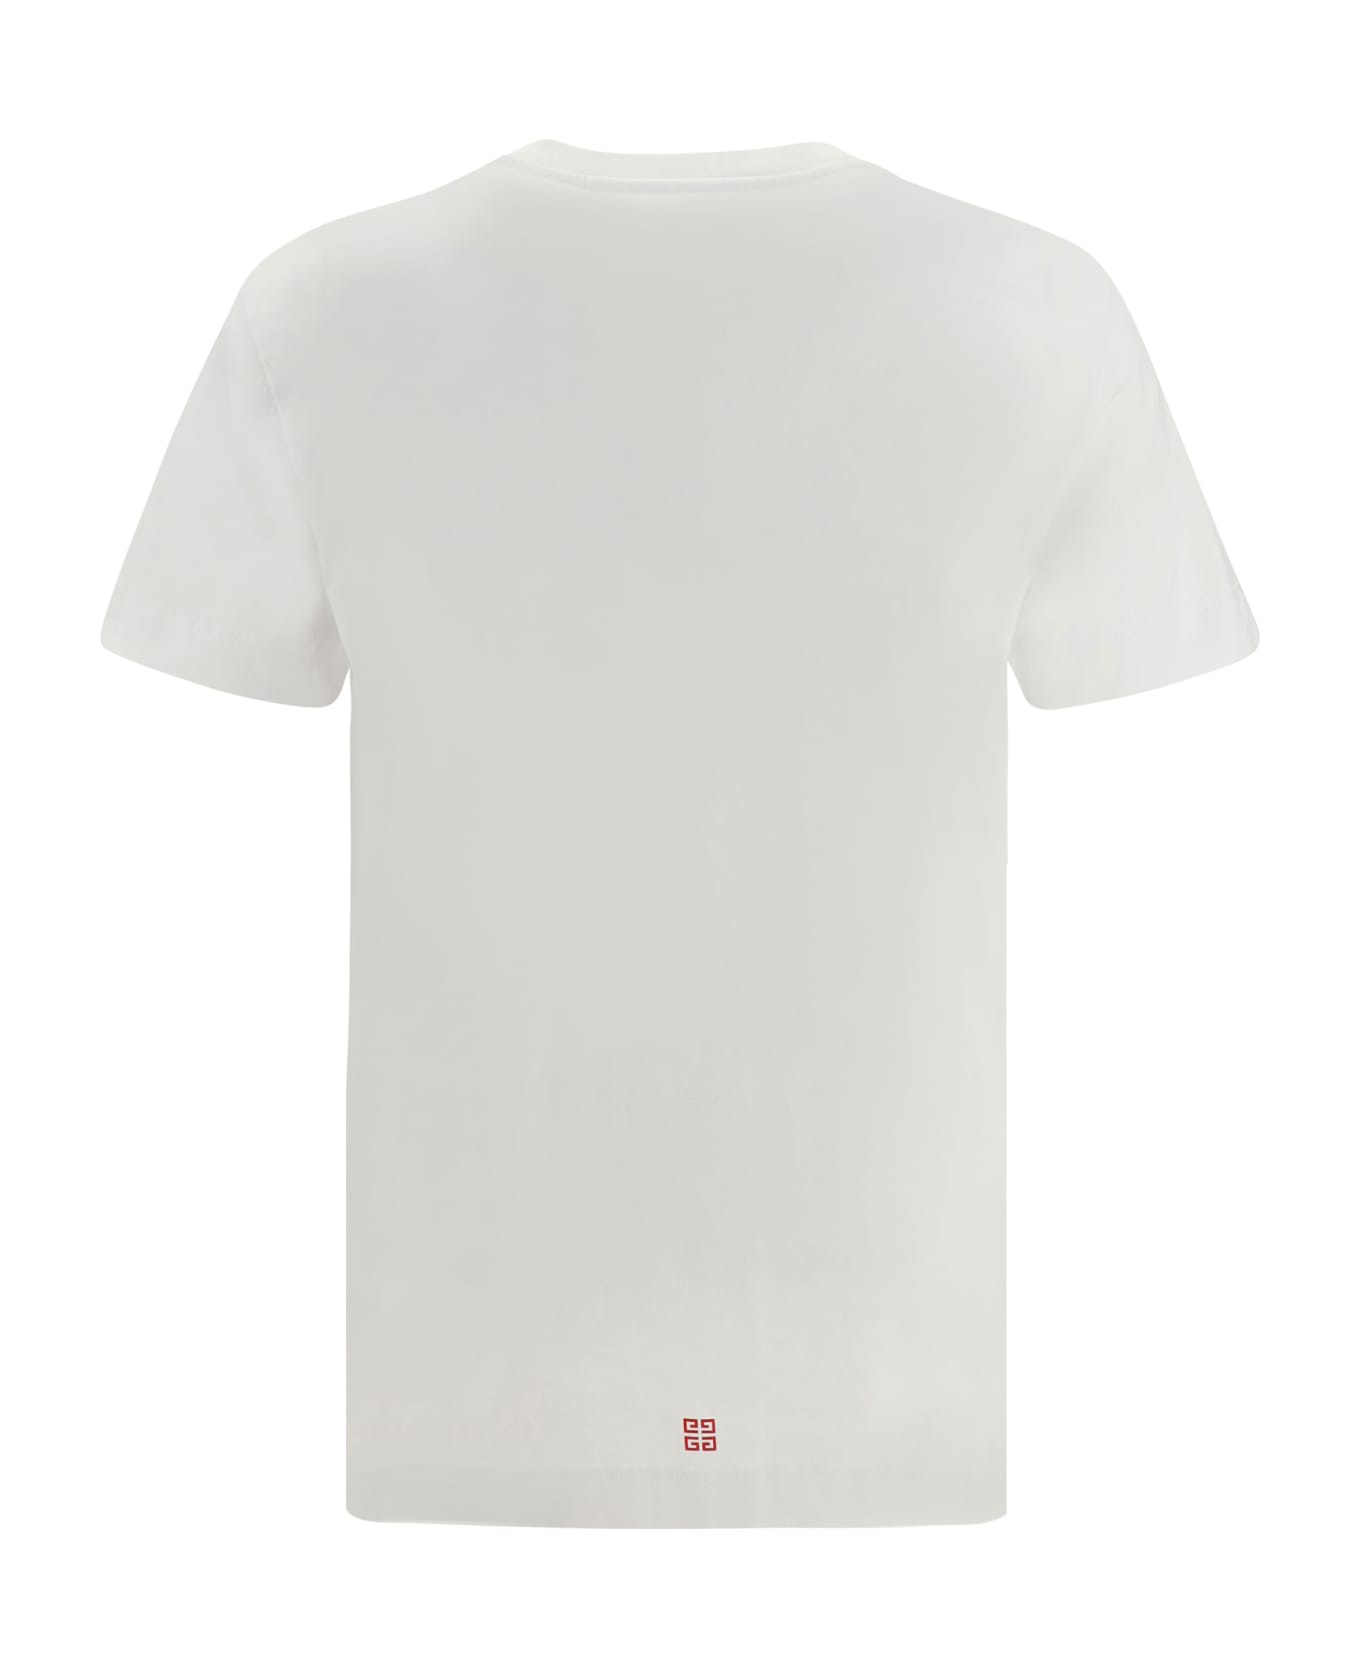 Givenchy 4g Stars T-shirt - White/red